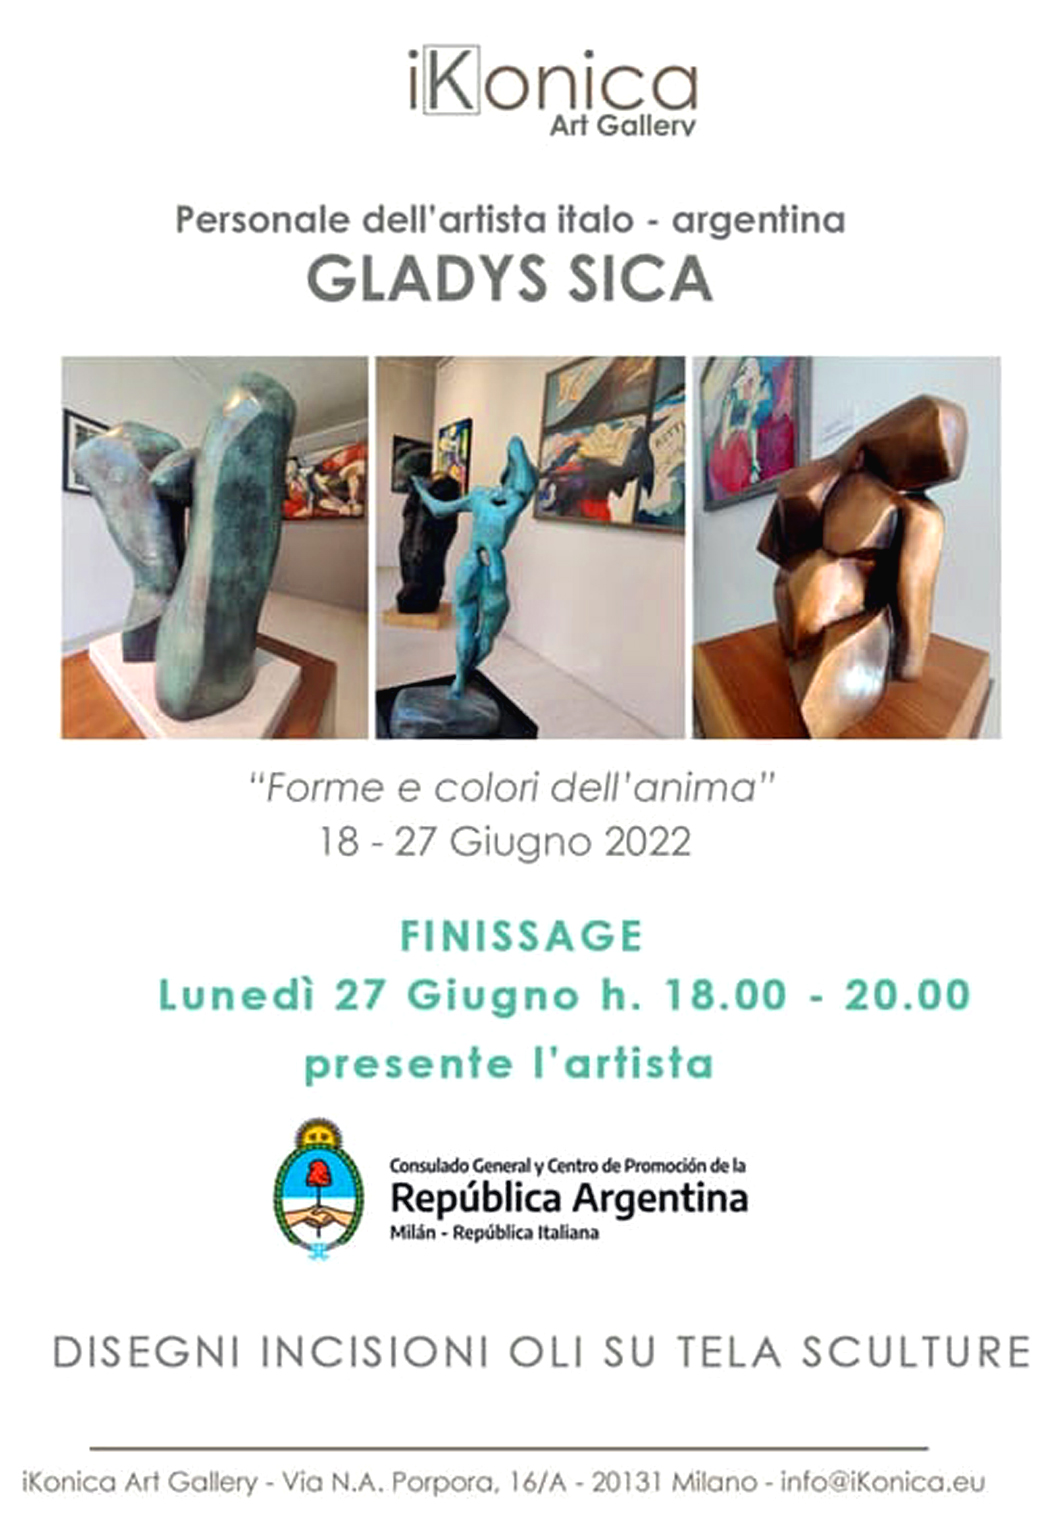 Finissage Mostra Personale, iKonica Art Gallery, Milano.